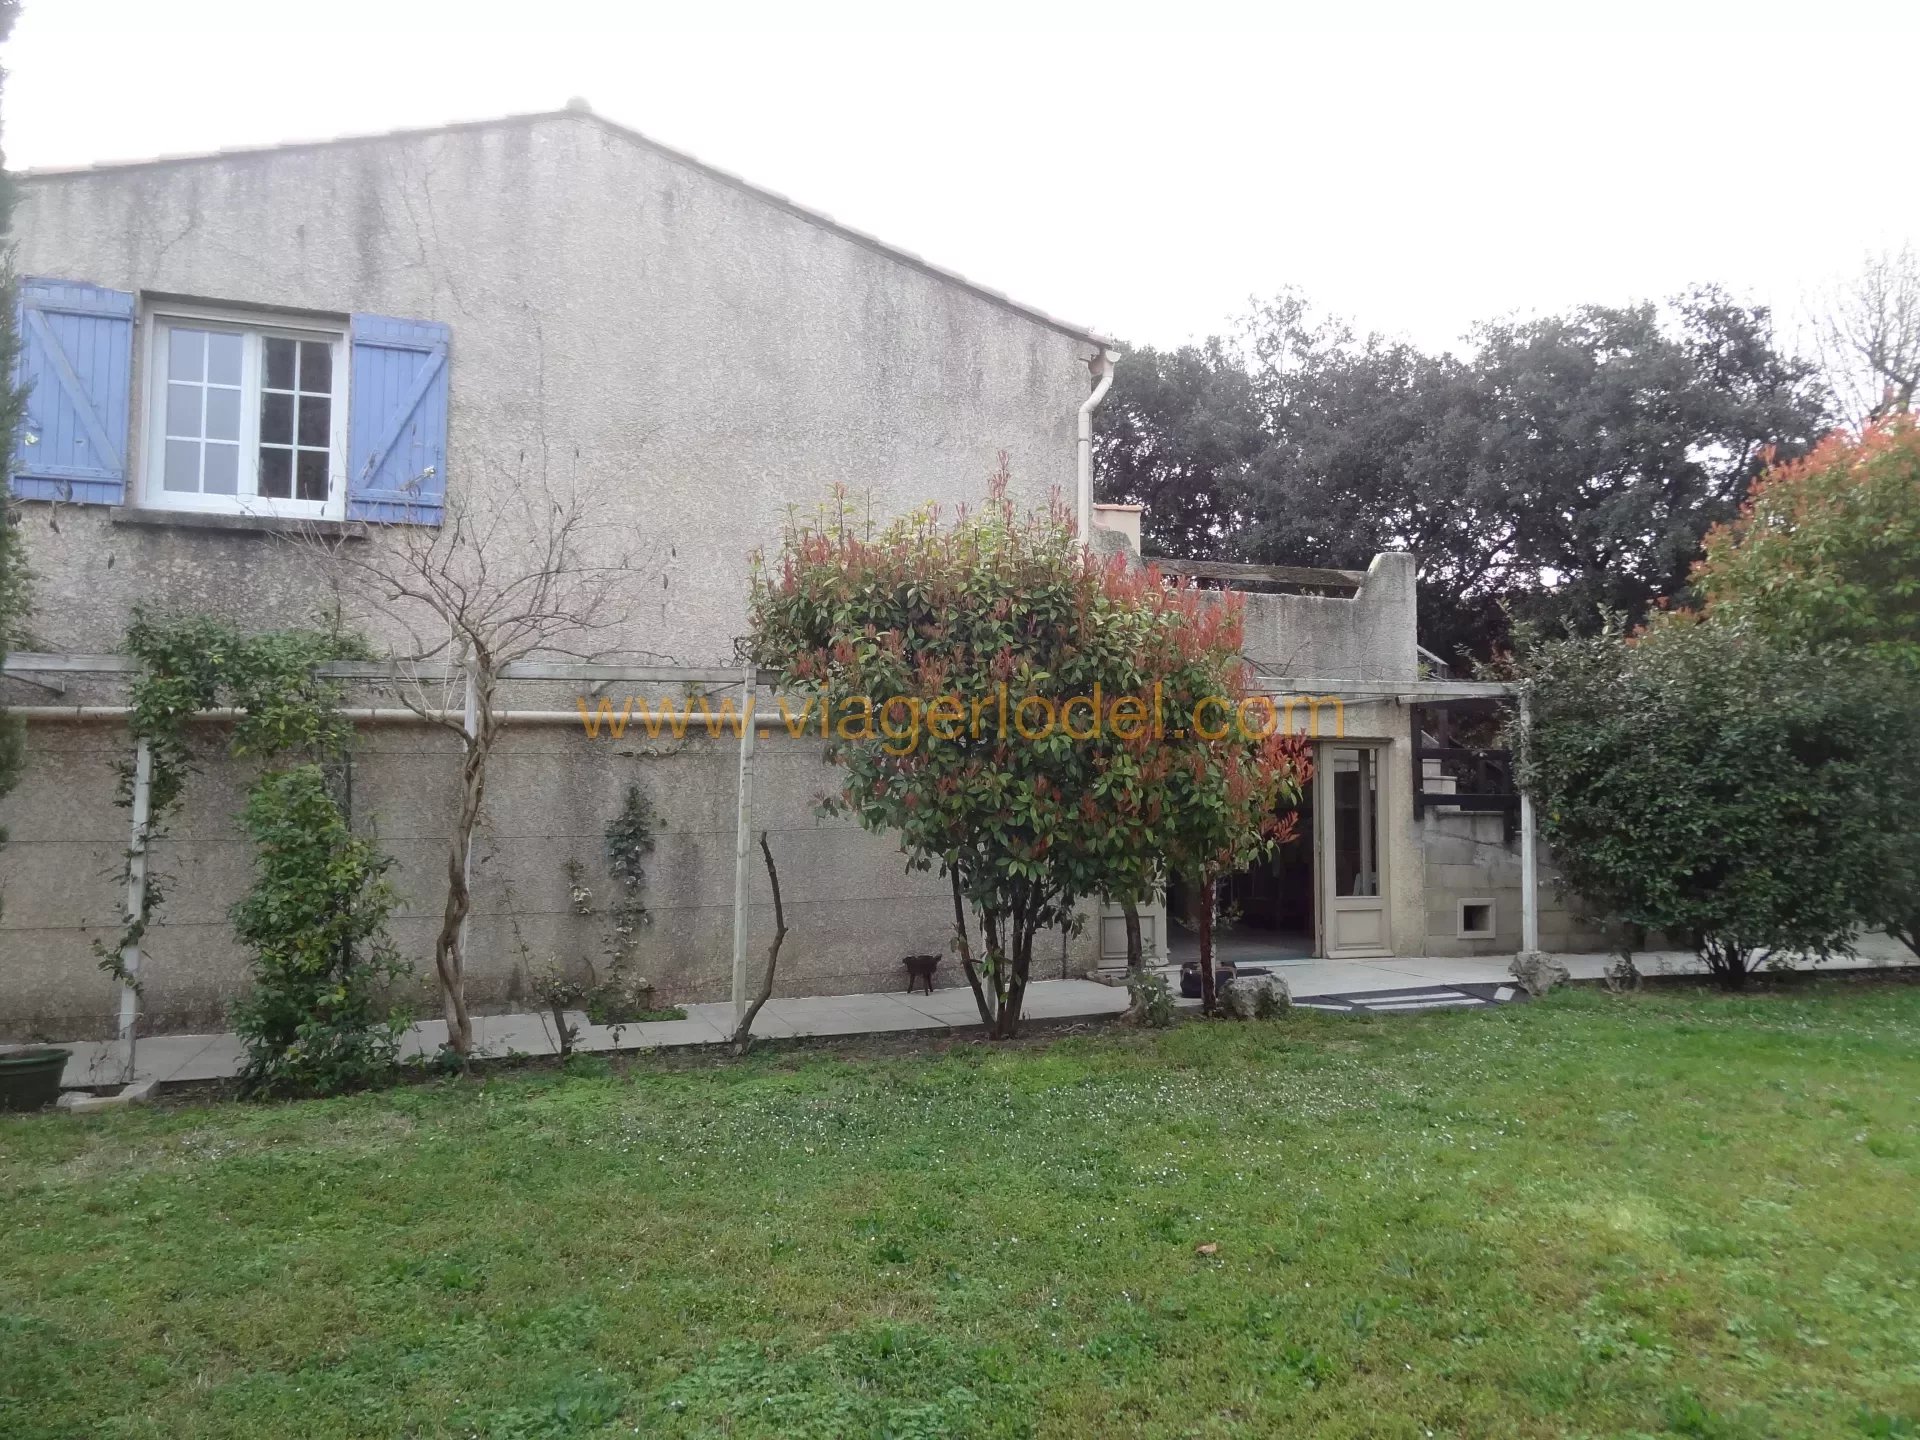 Ref. 9094 - BARE OWNERSHIP - Occupied house